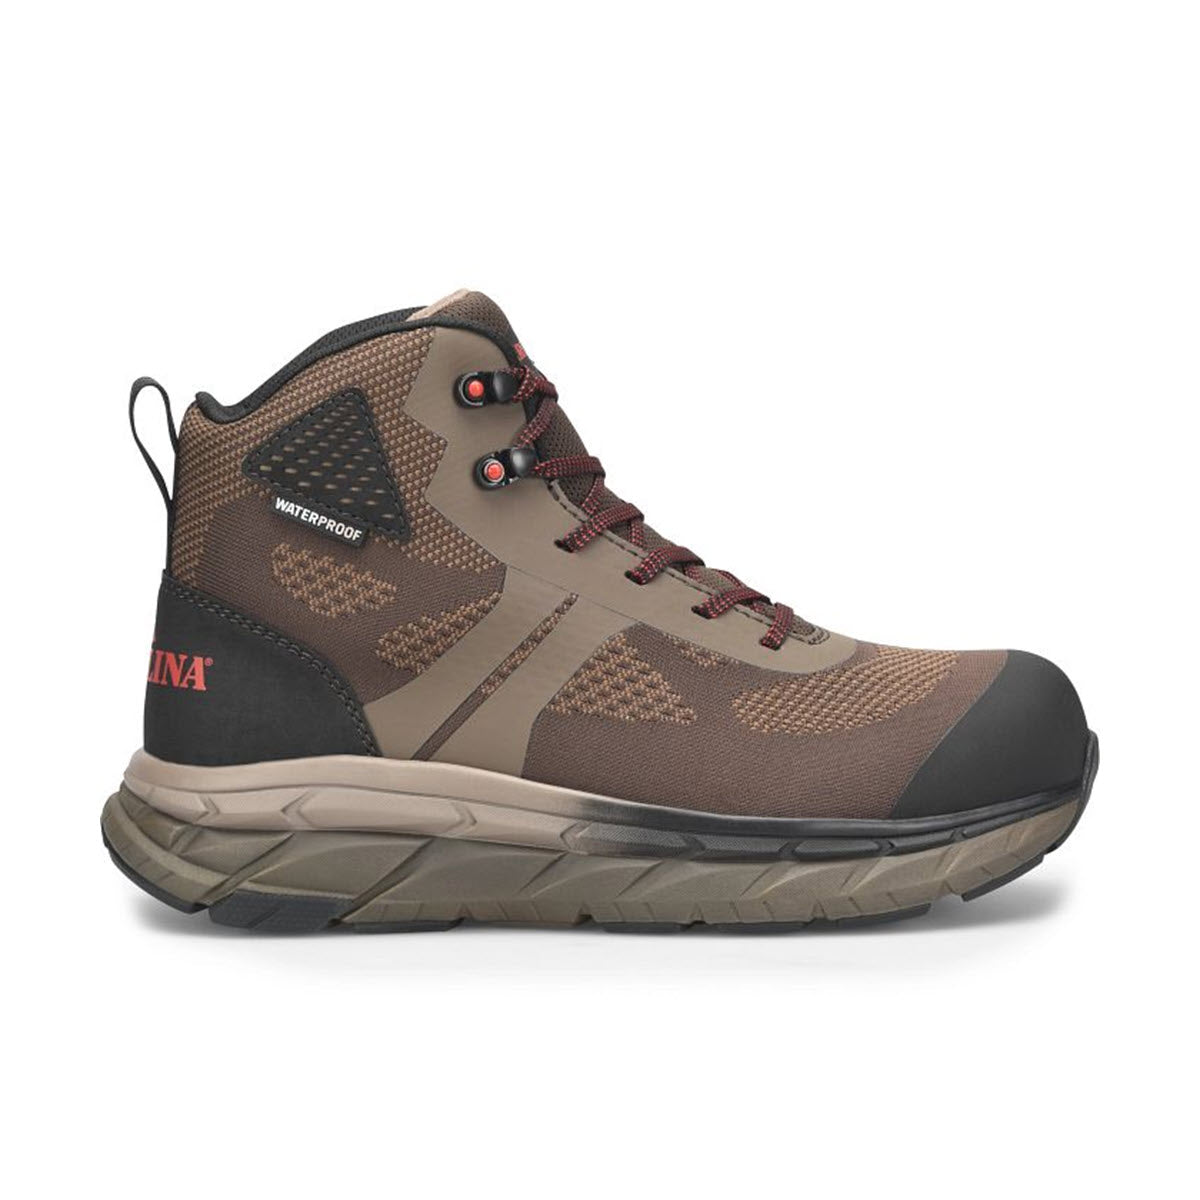 A brown and black Carolina 1915 Comp Toe Hiker waterproof hiking boot with mesh panels and thick rubber sole, isolated on a white background.